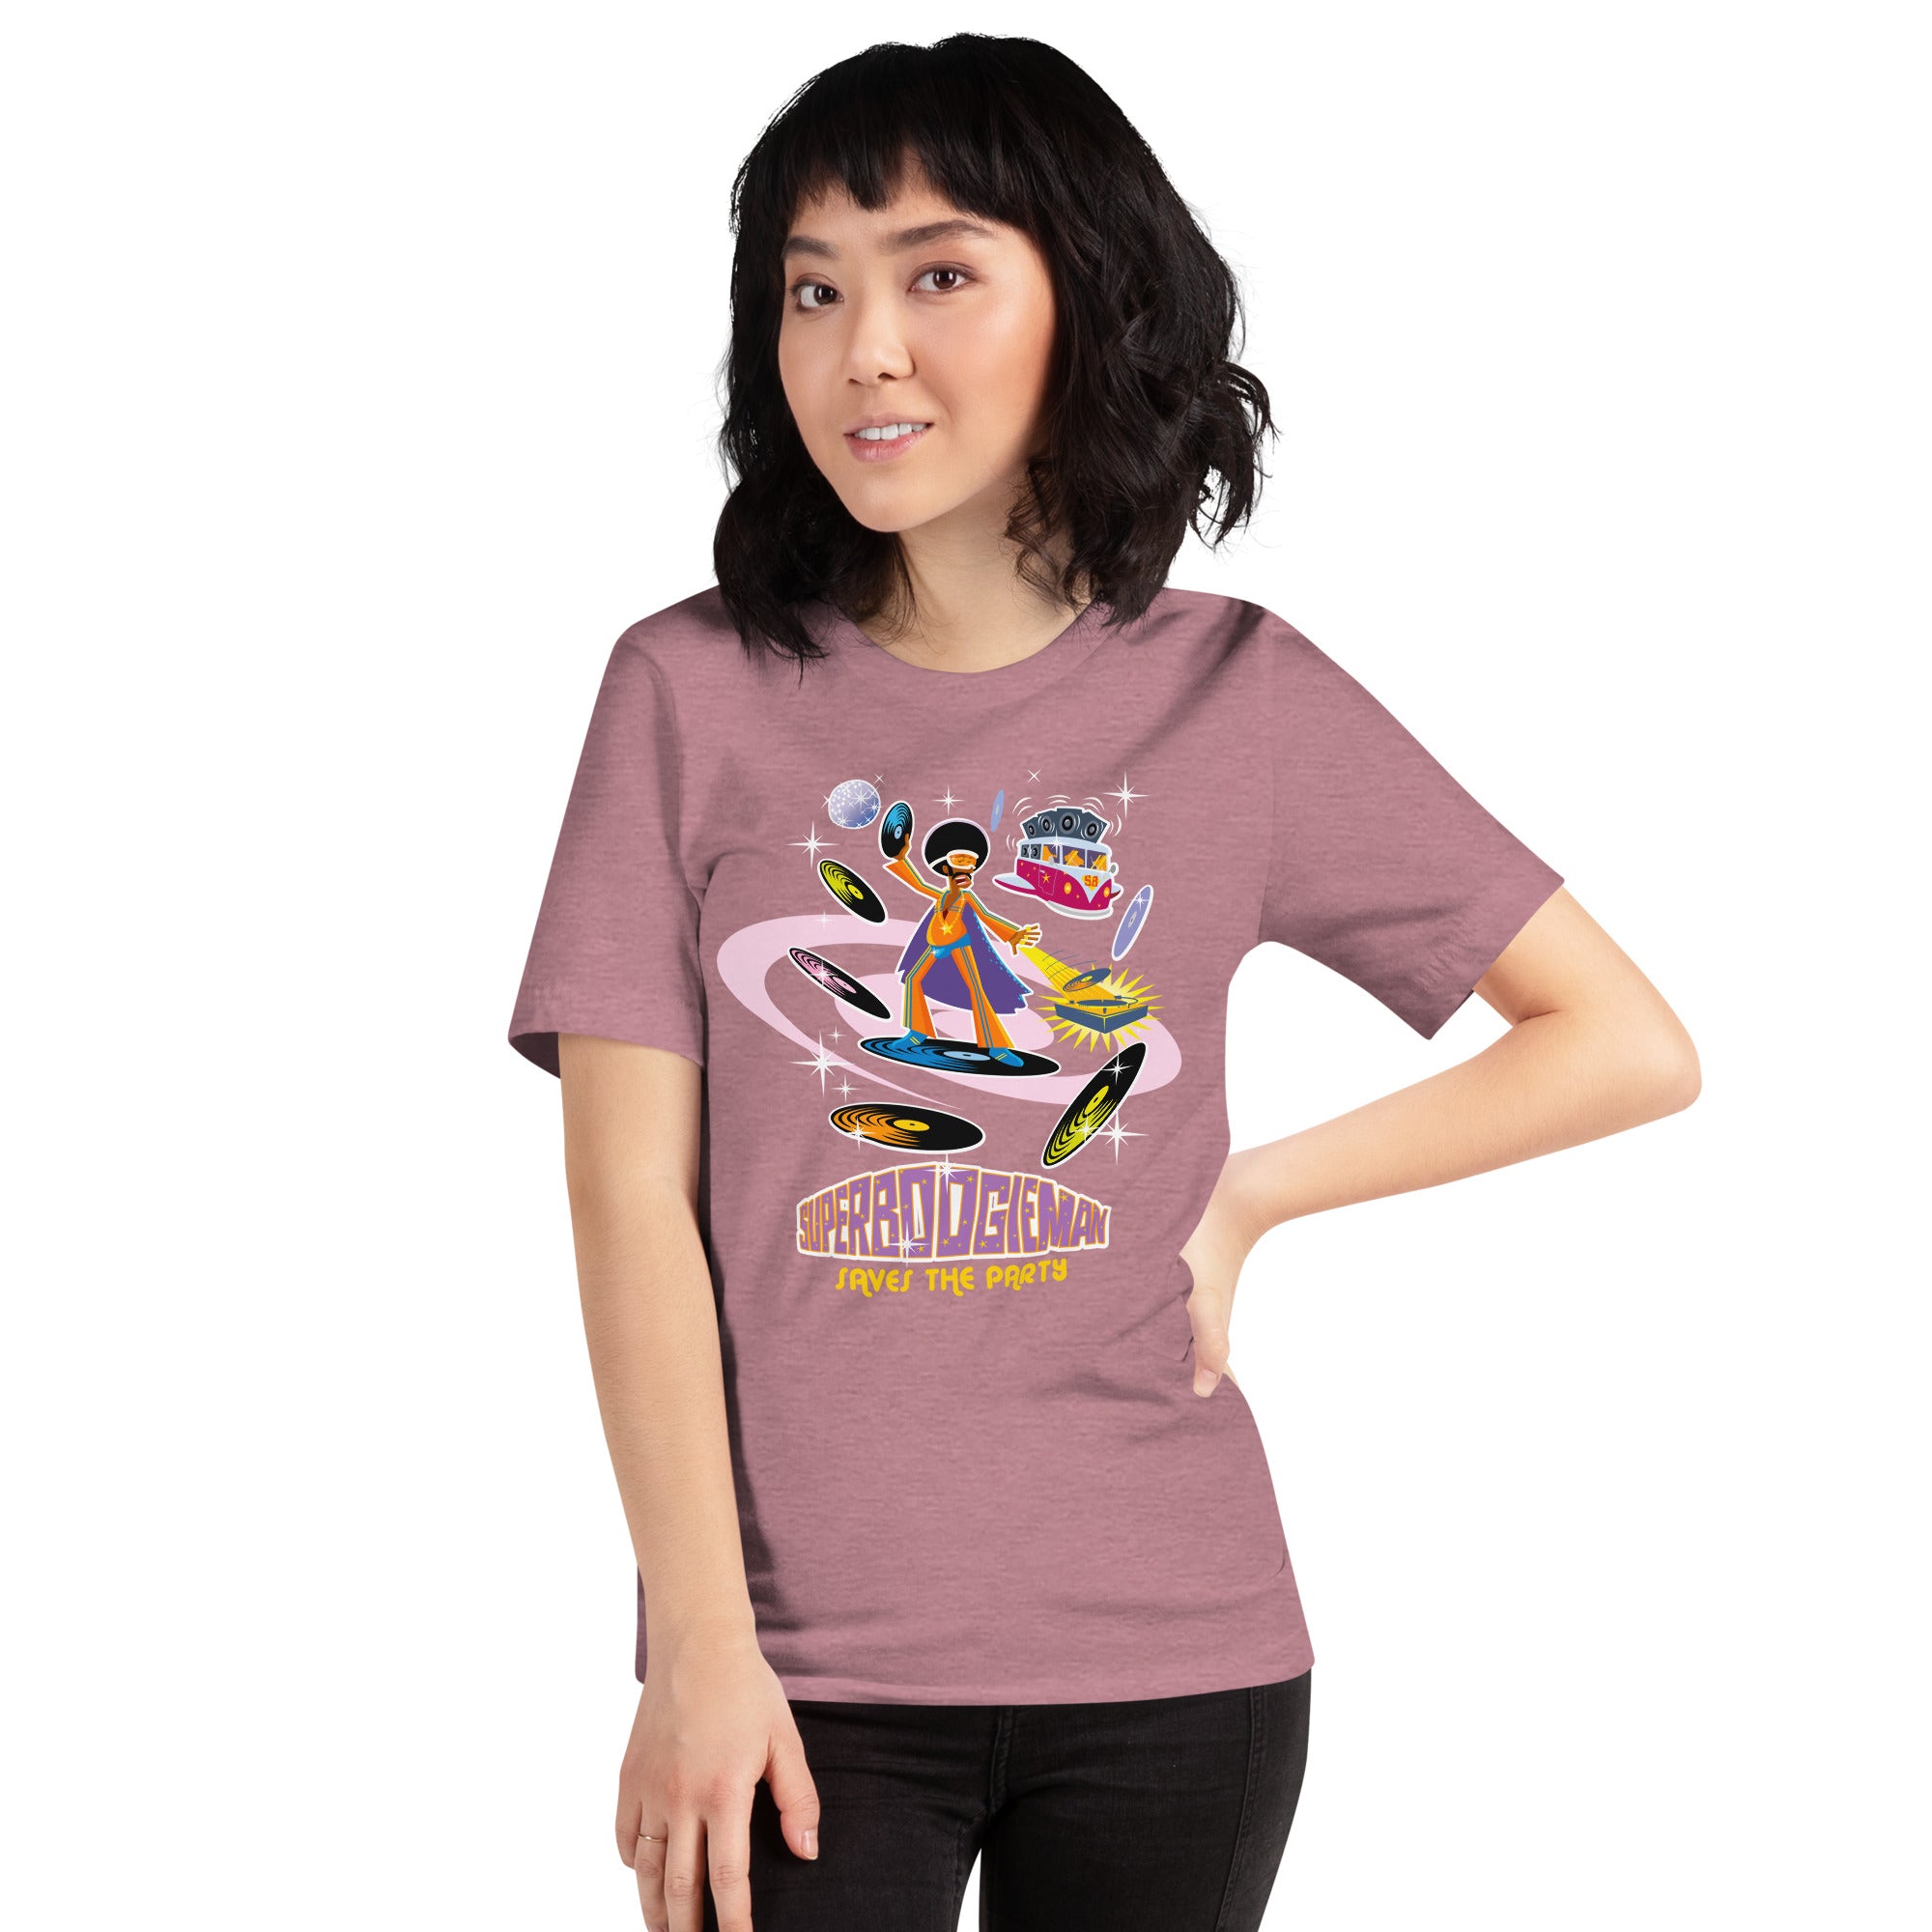 Unisex t-shirt Superboogieman saves the Party on bright heather colors